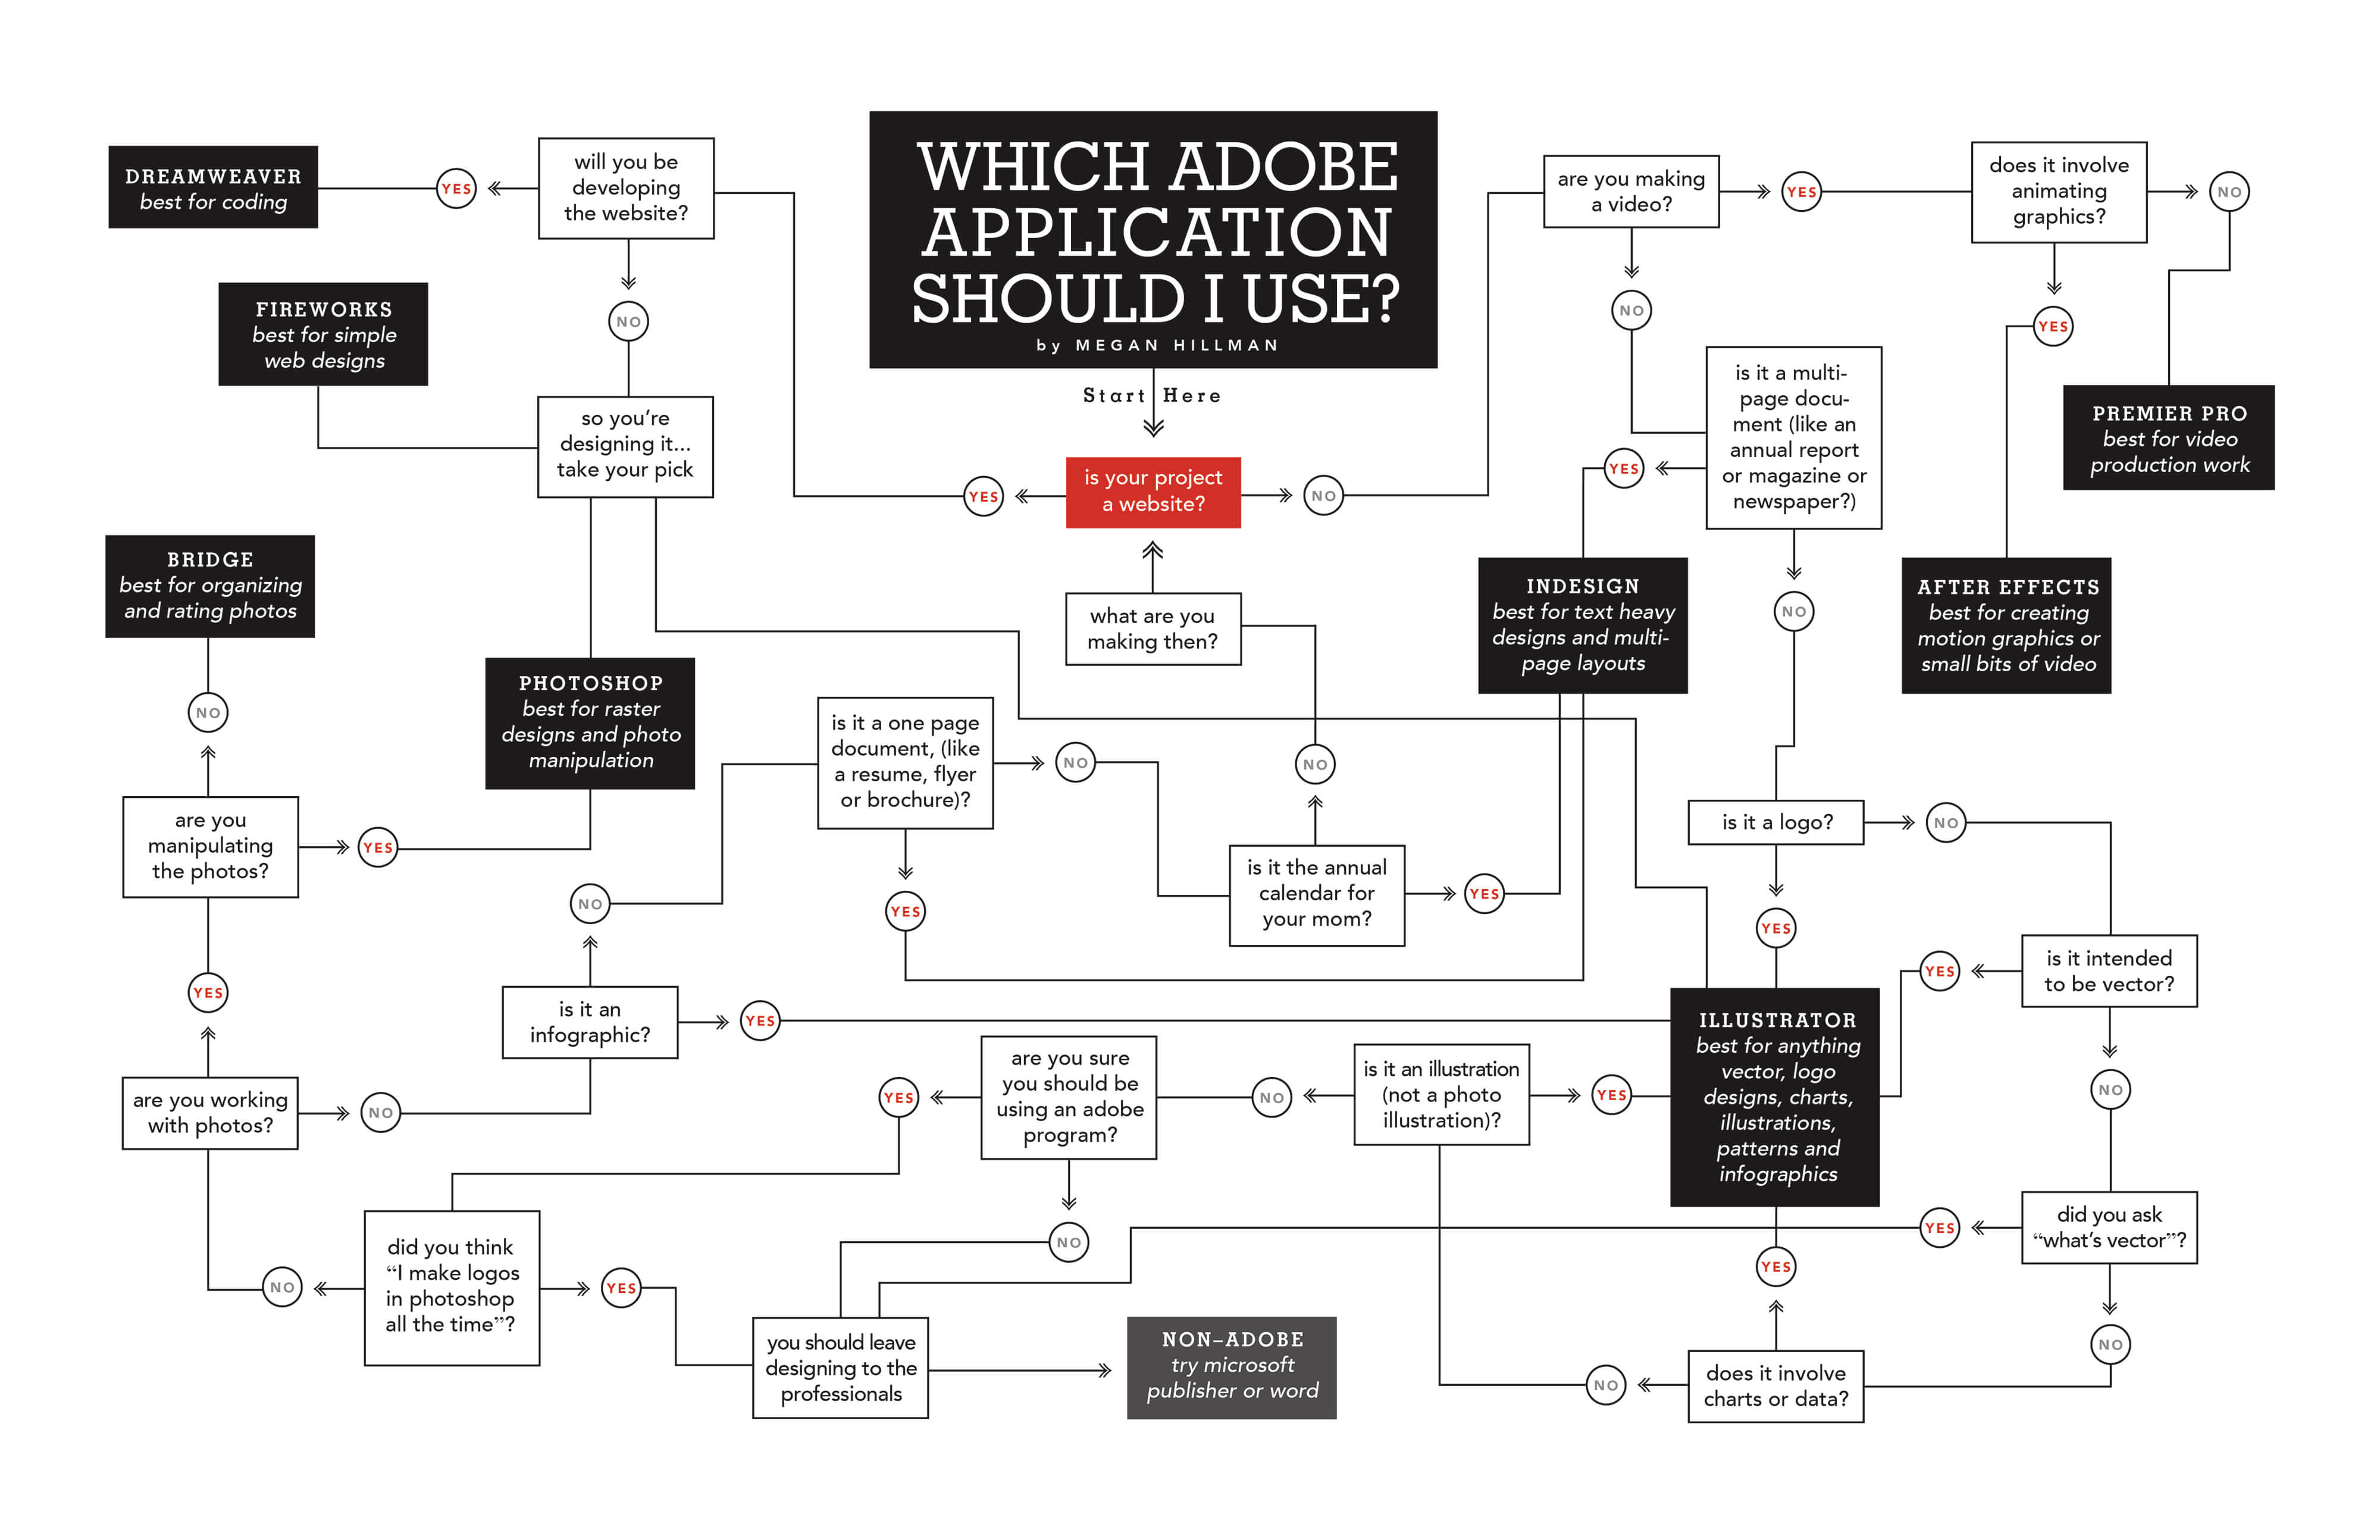 Which Adobe Application Should I Use? by Megan Hillman